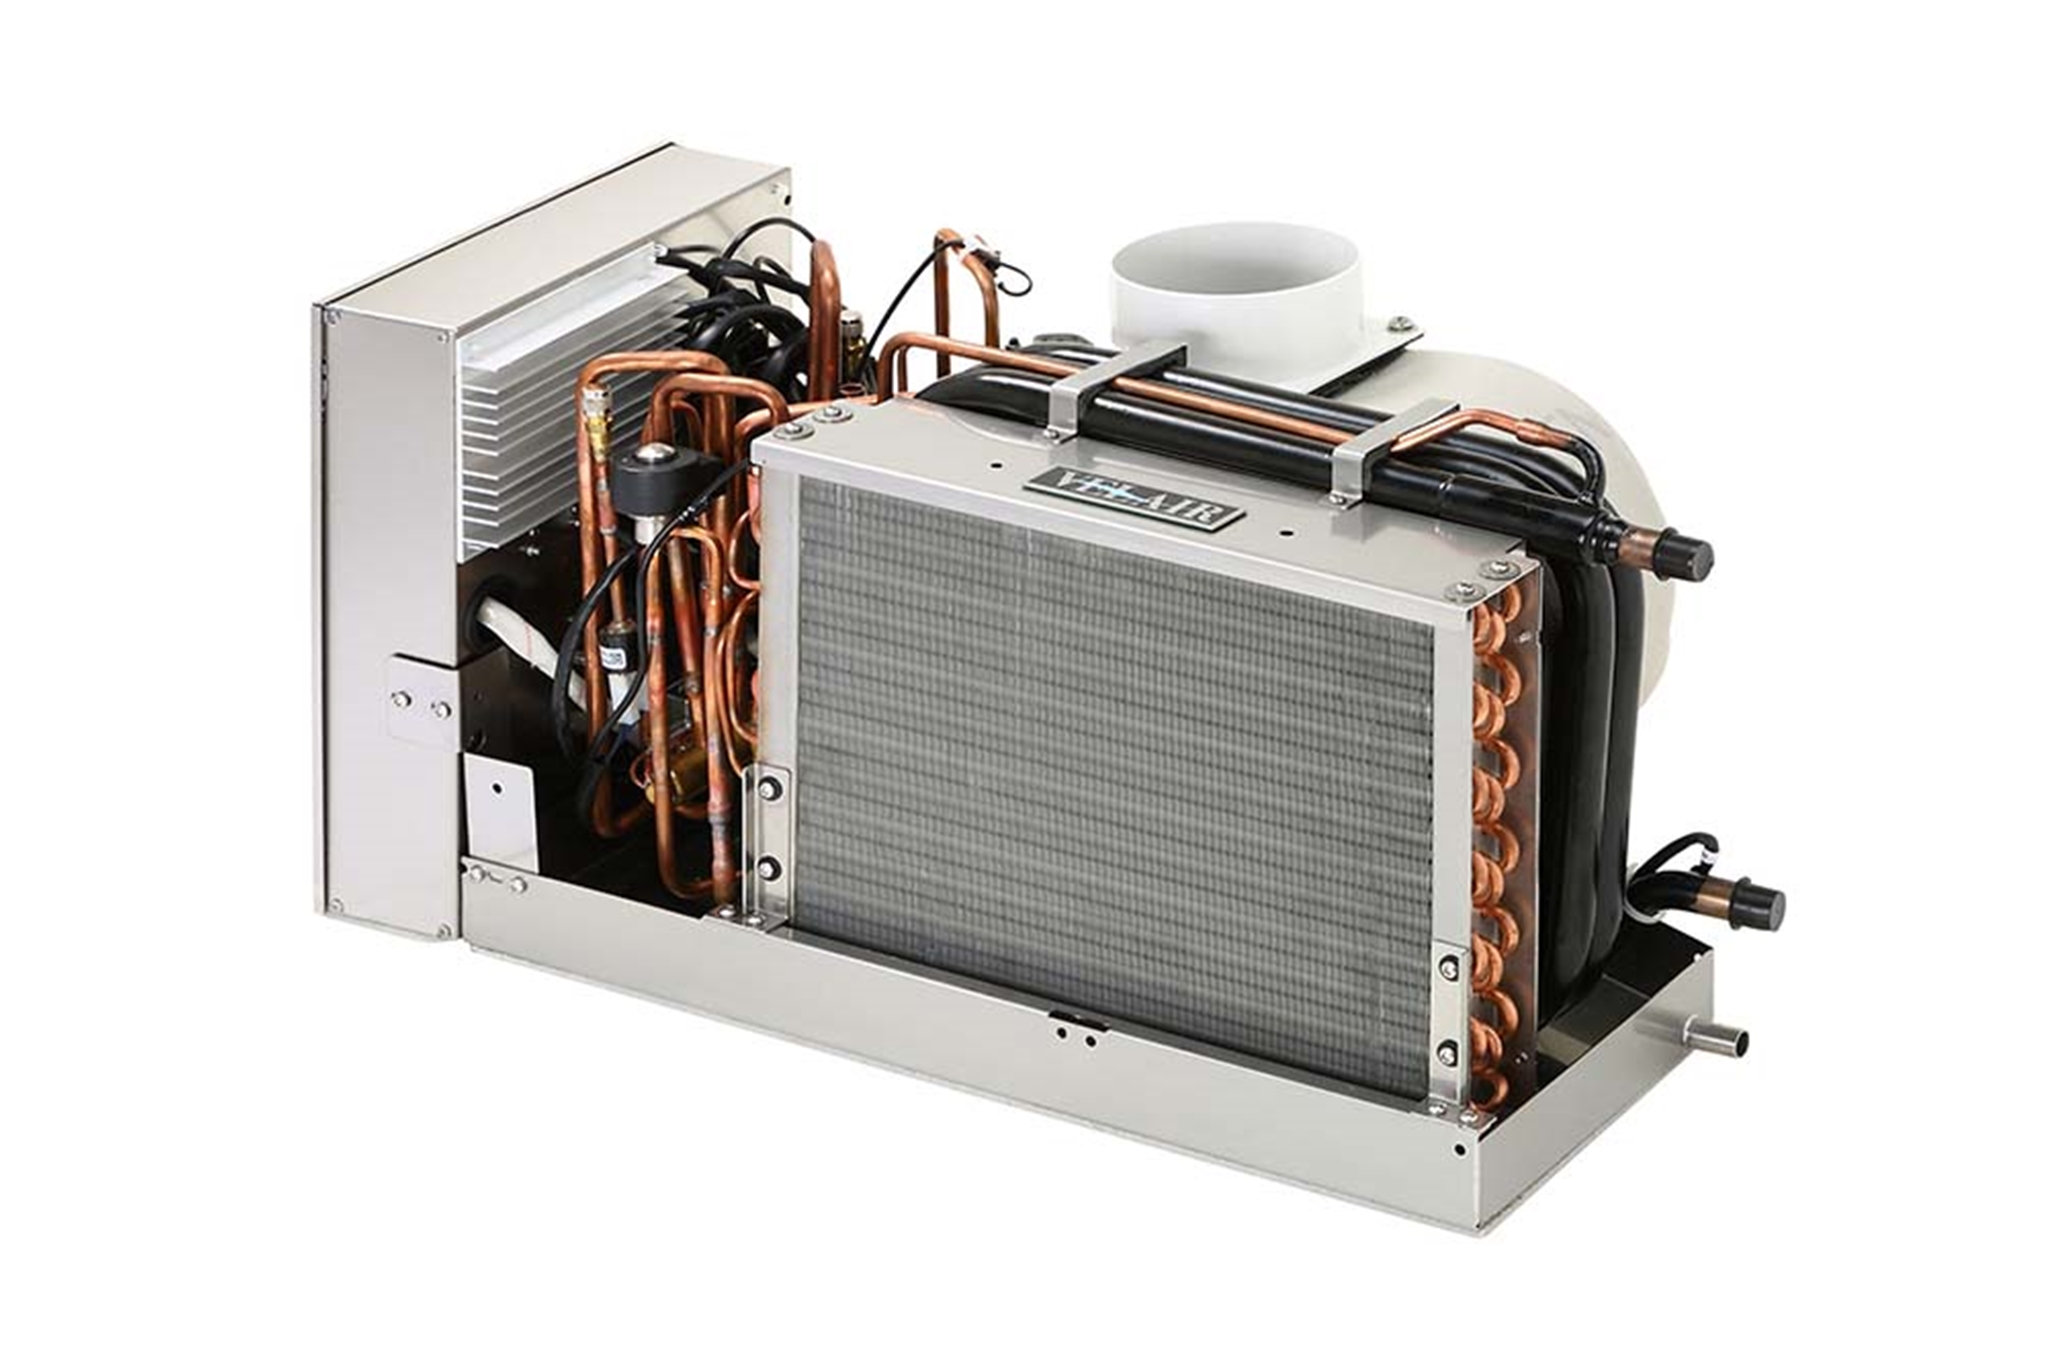 24832JU Velair Compact i16 Marine Air Conditioning System